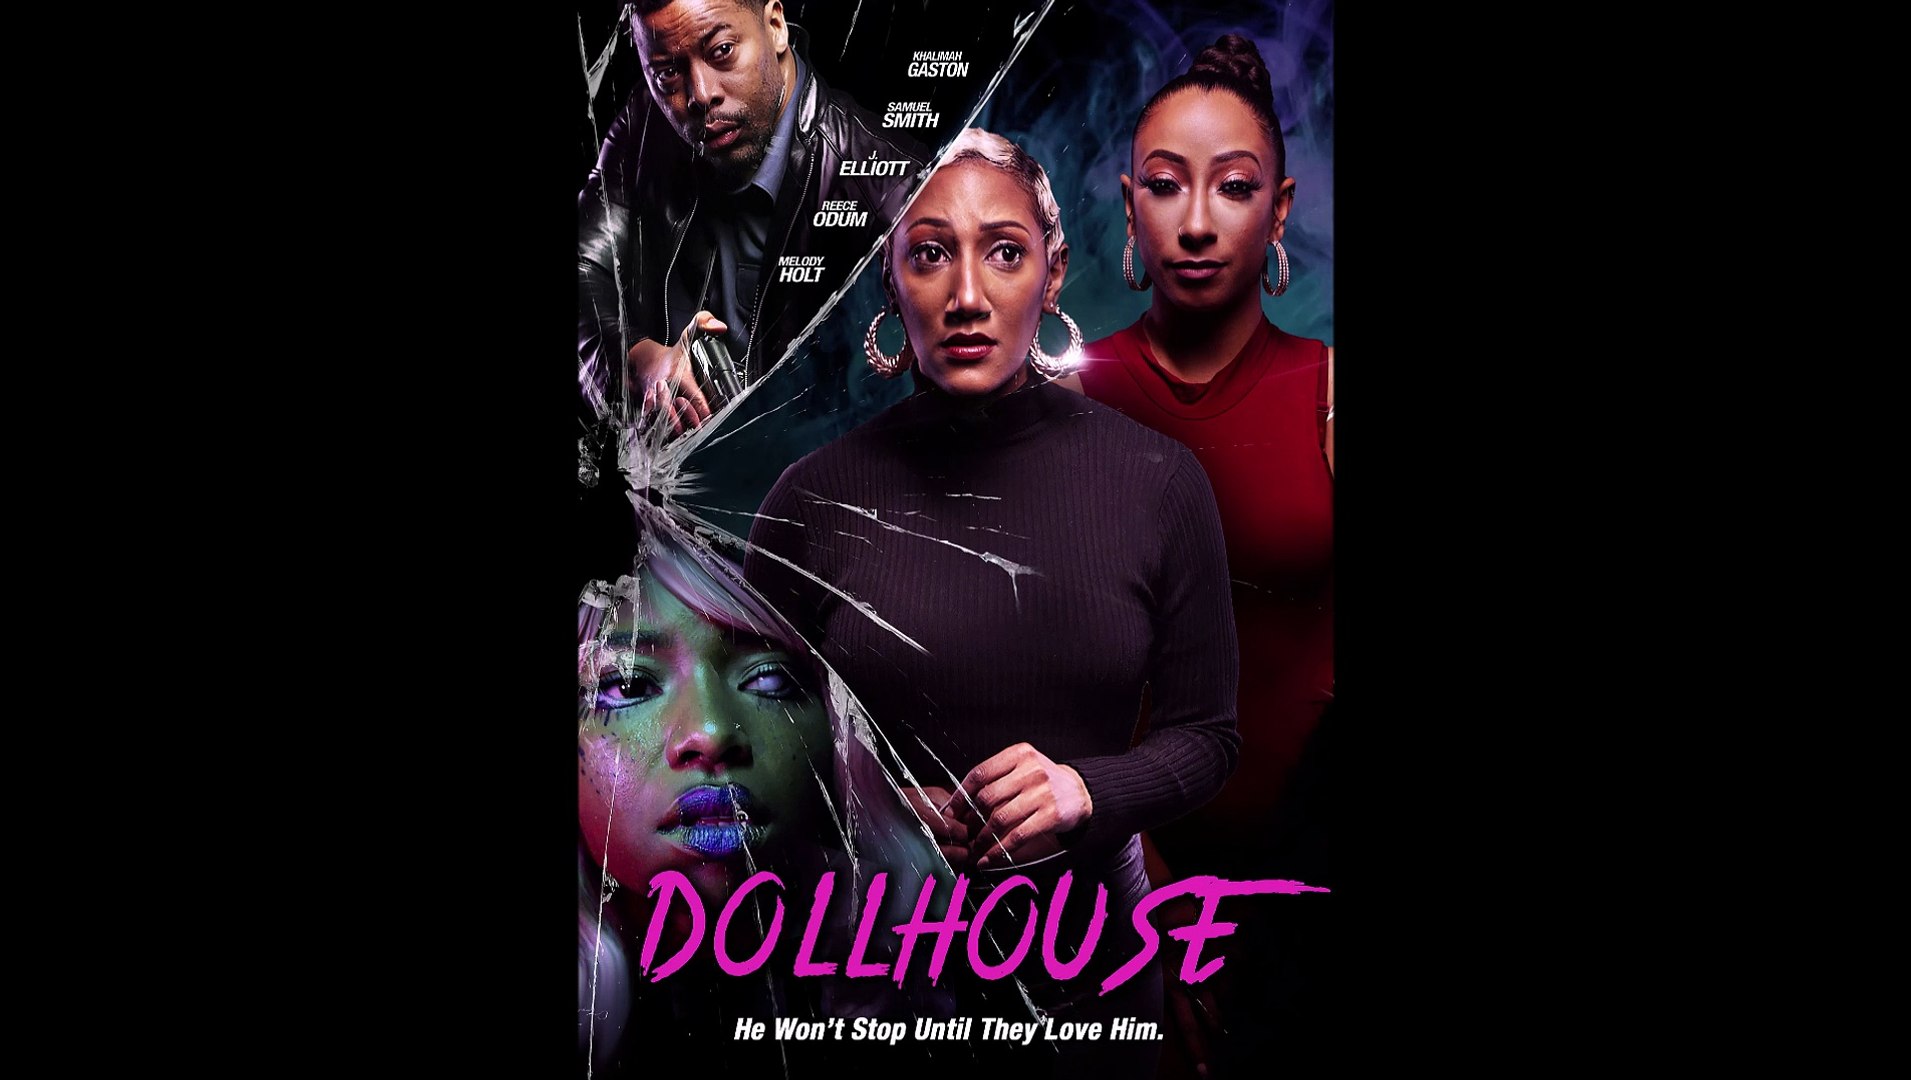 Doll House - Official Trailer © 2022 Drama - video Dailymotion